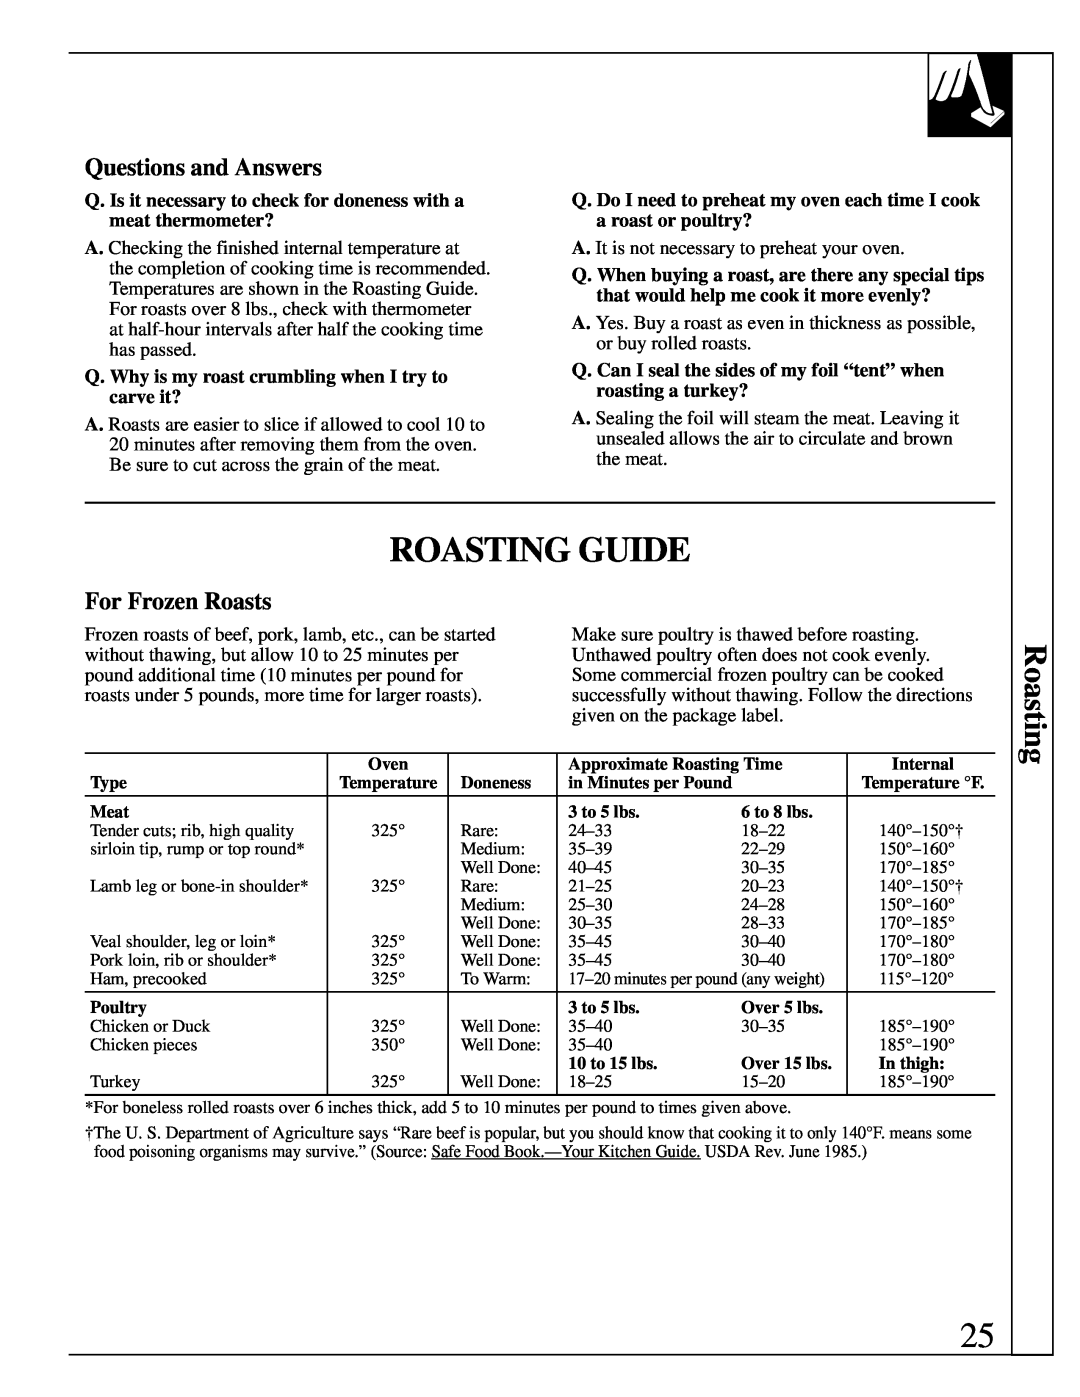 GE 10-95 CG Roasting Guide, Questions and Answers, For Frozen Roasts, Q. Why is my roast crumbling when I try to carve it? 